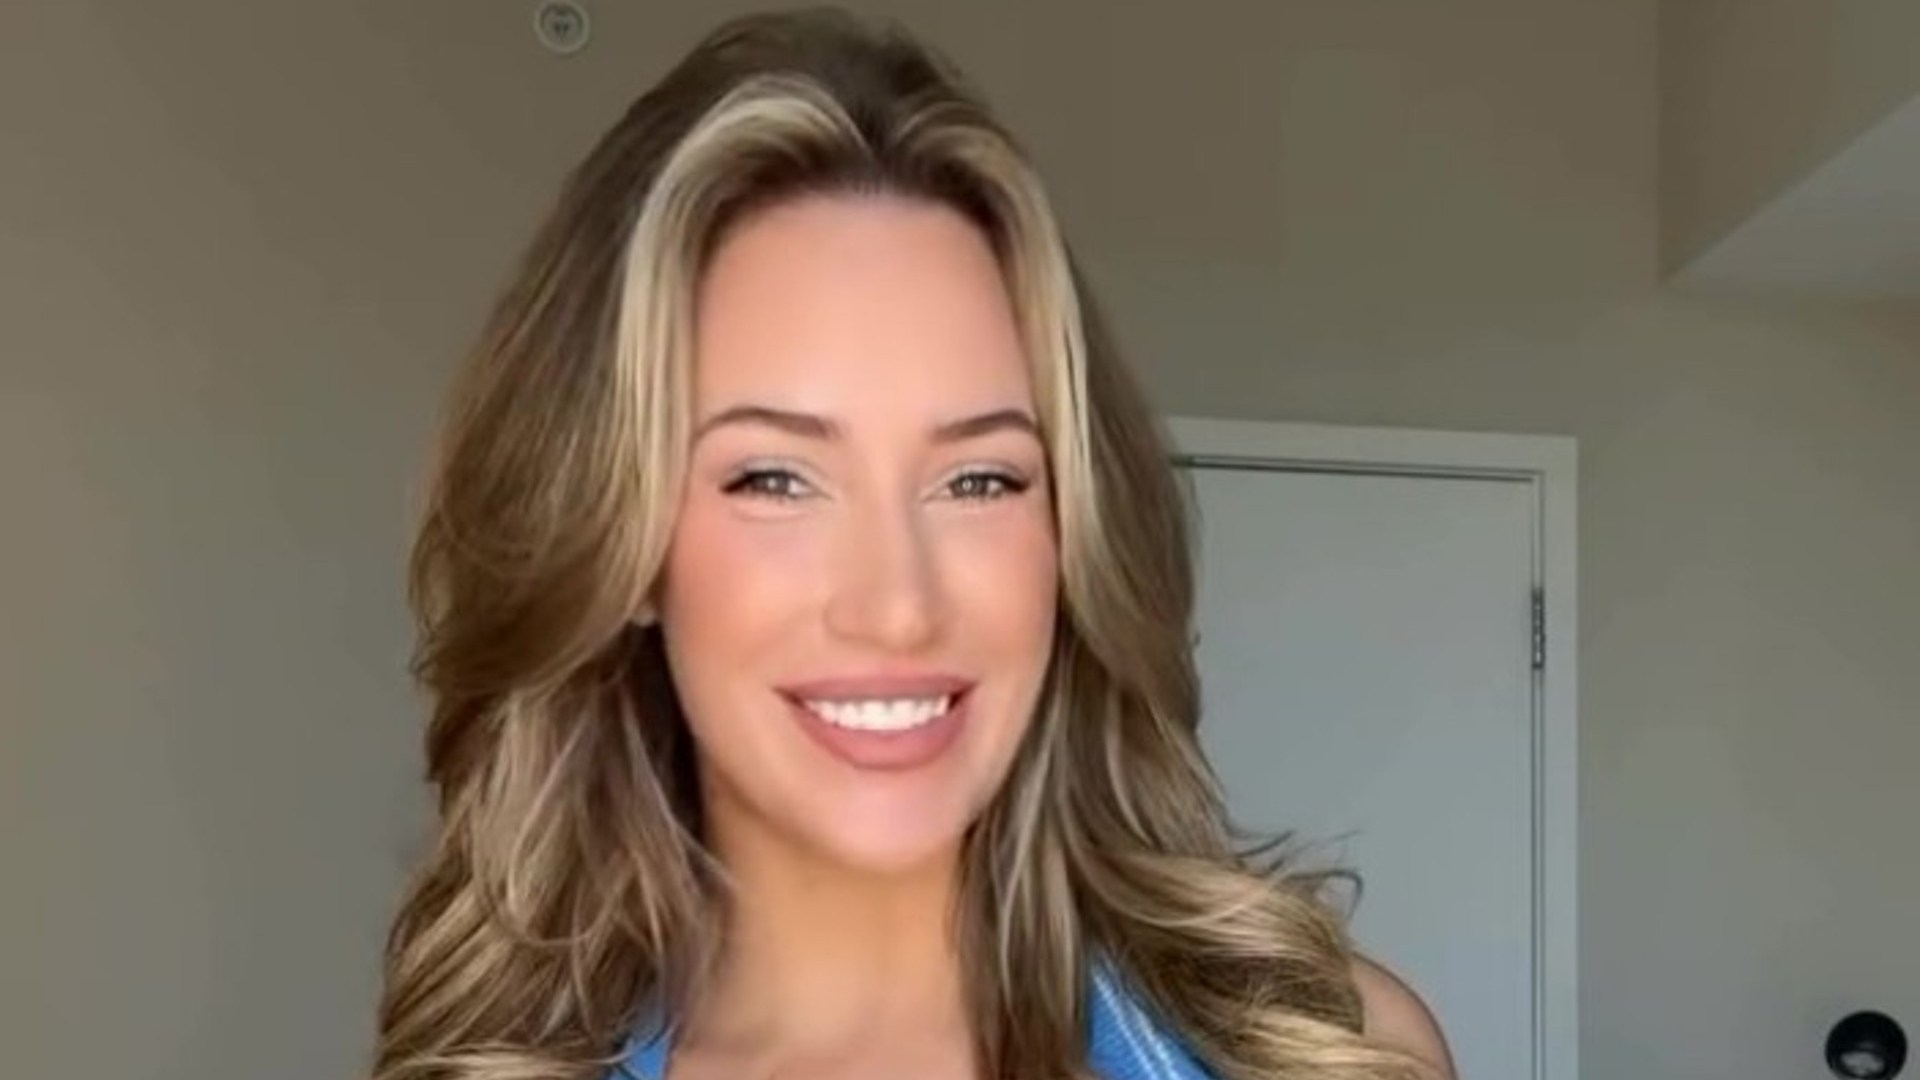 Paige Spiranac shows off glam new look as golf sensation sends fans into meltdown with low-cut top